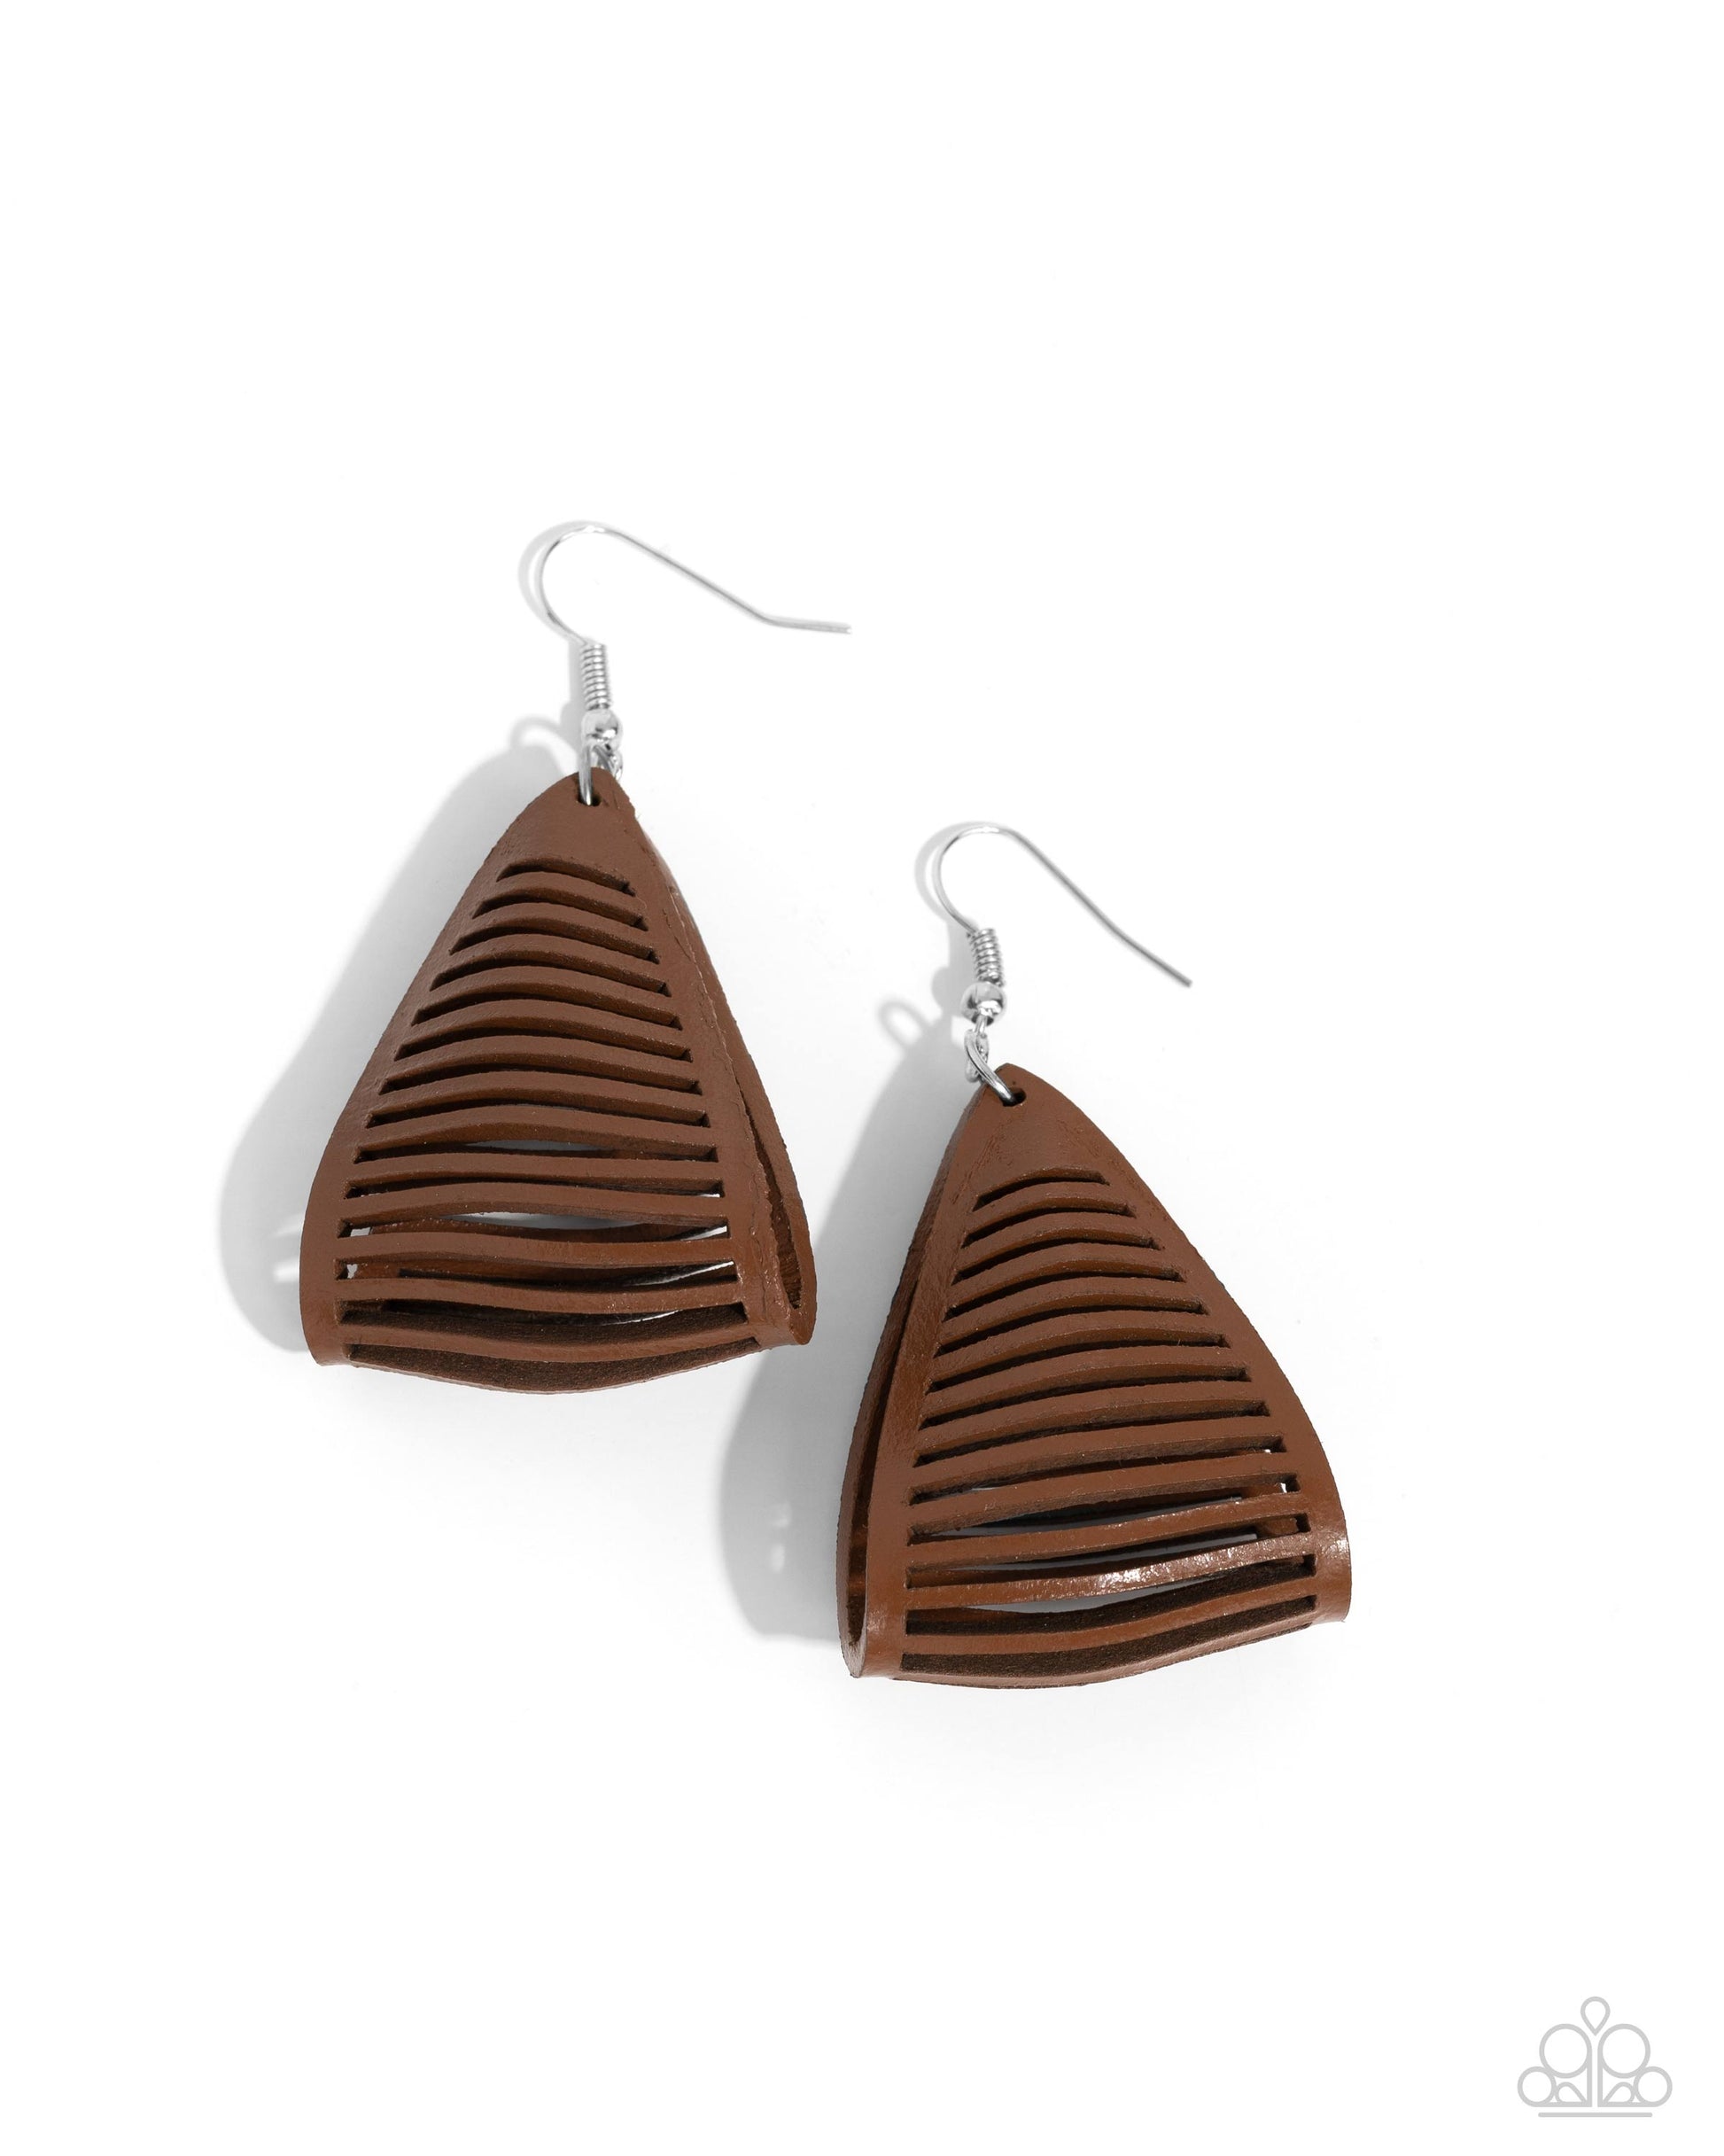 In and OUTBACK - brown - Paparazzi earrings